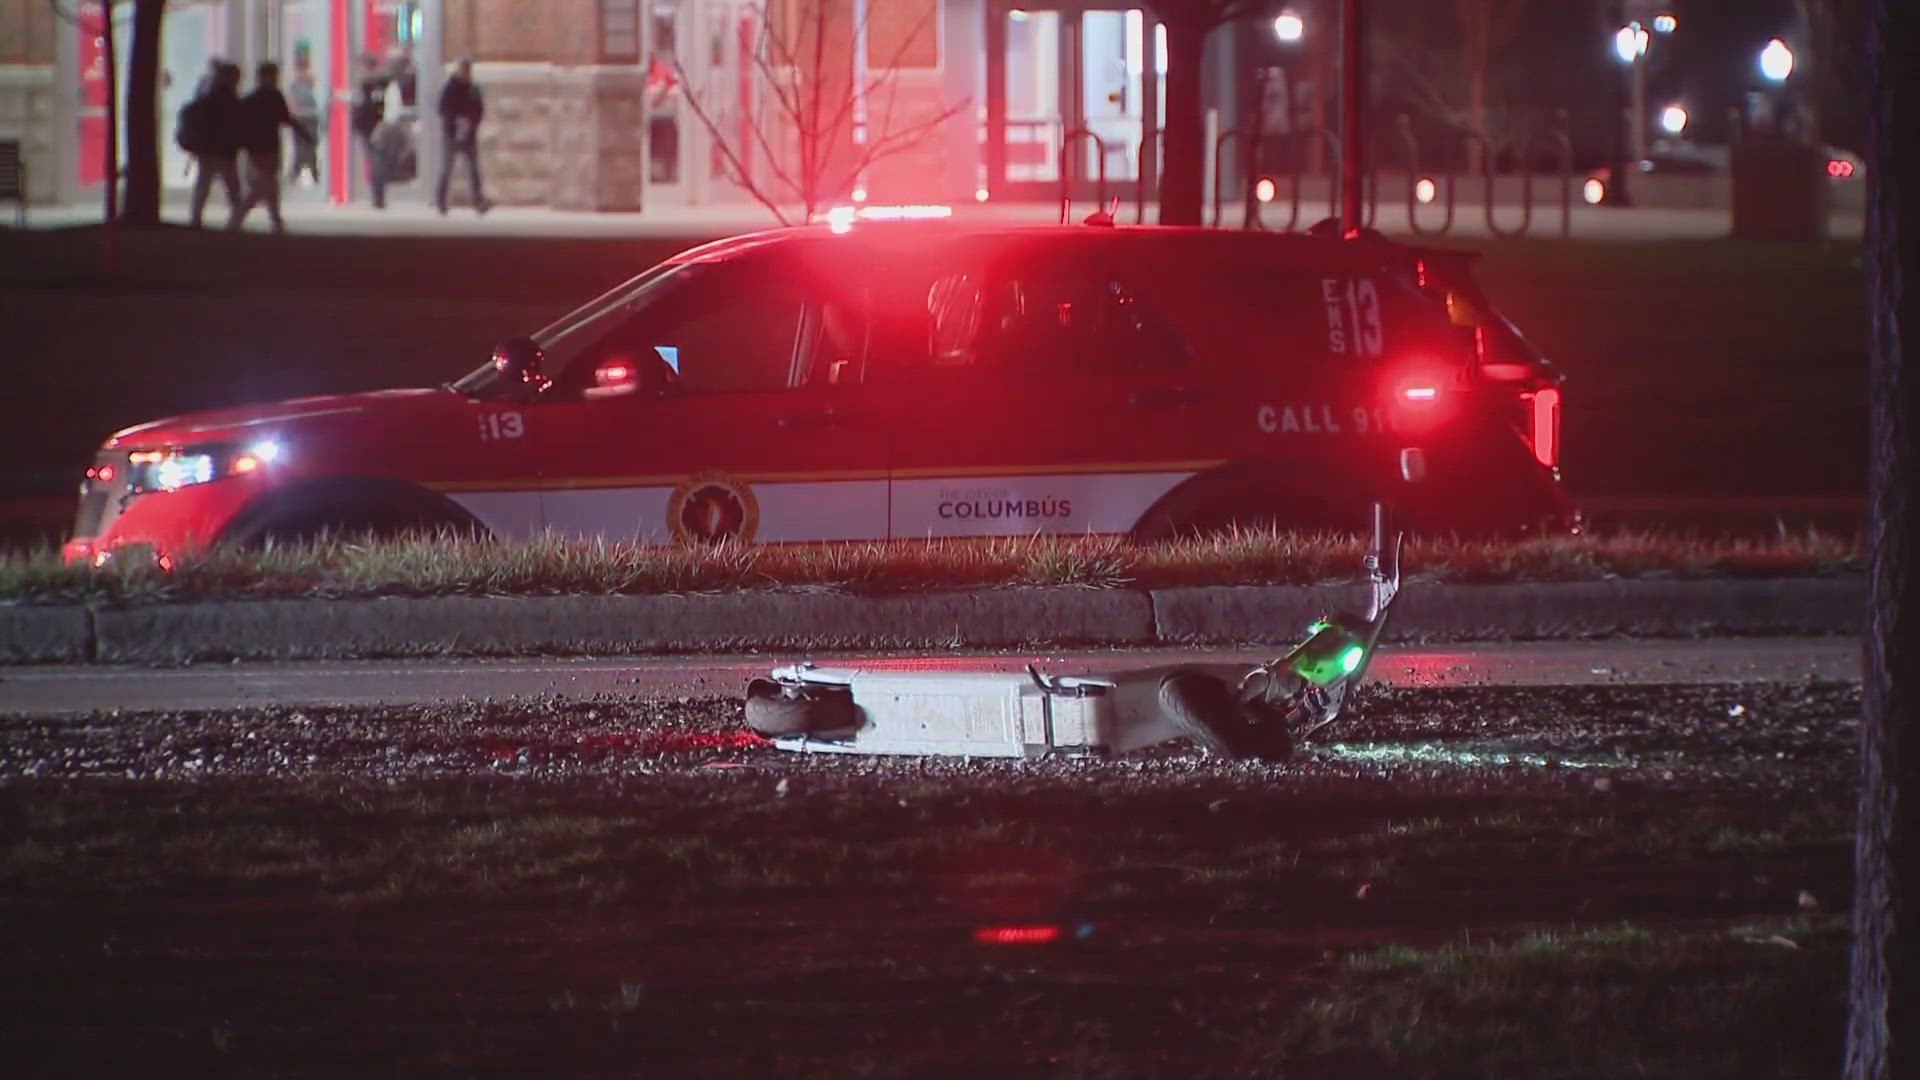 Two people were injured Sunday night after being struck by a vehicle outside of the Scottenstein Center, according to the Columbus Division of Fire.